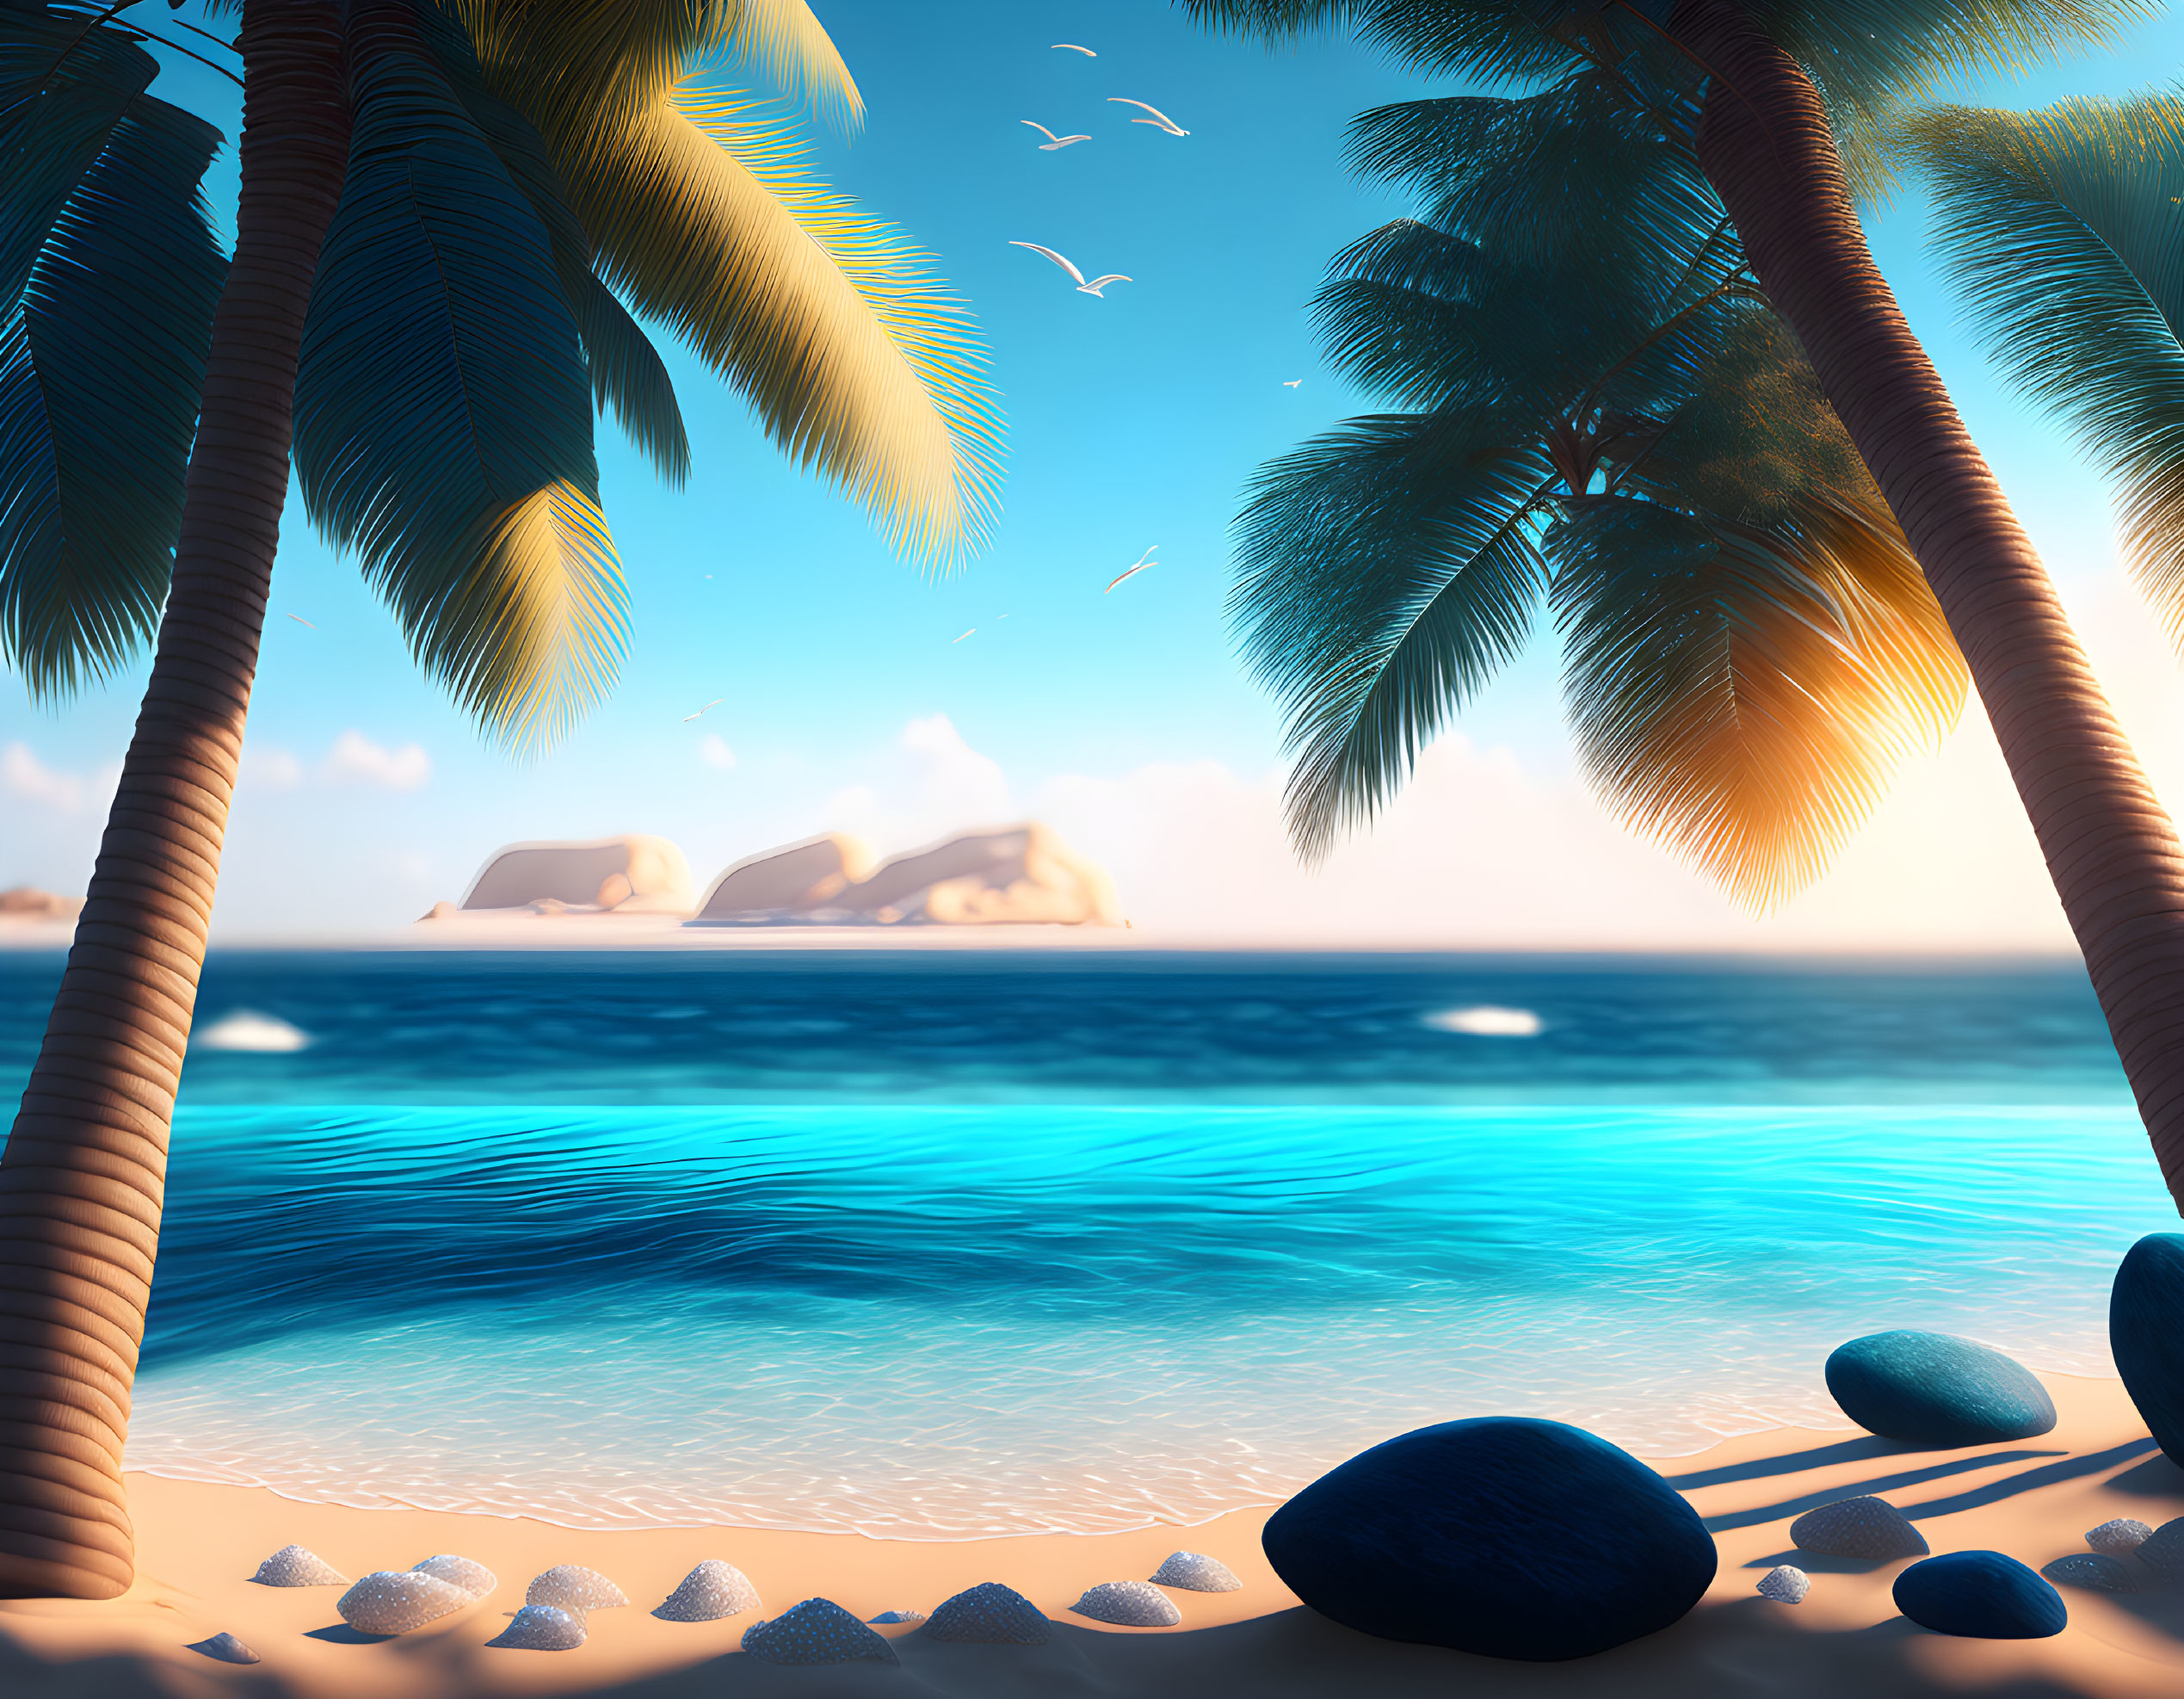 Tropical beach with palm trees, clear water, white sand, and distant island under sunny sky.